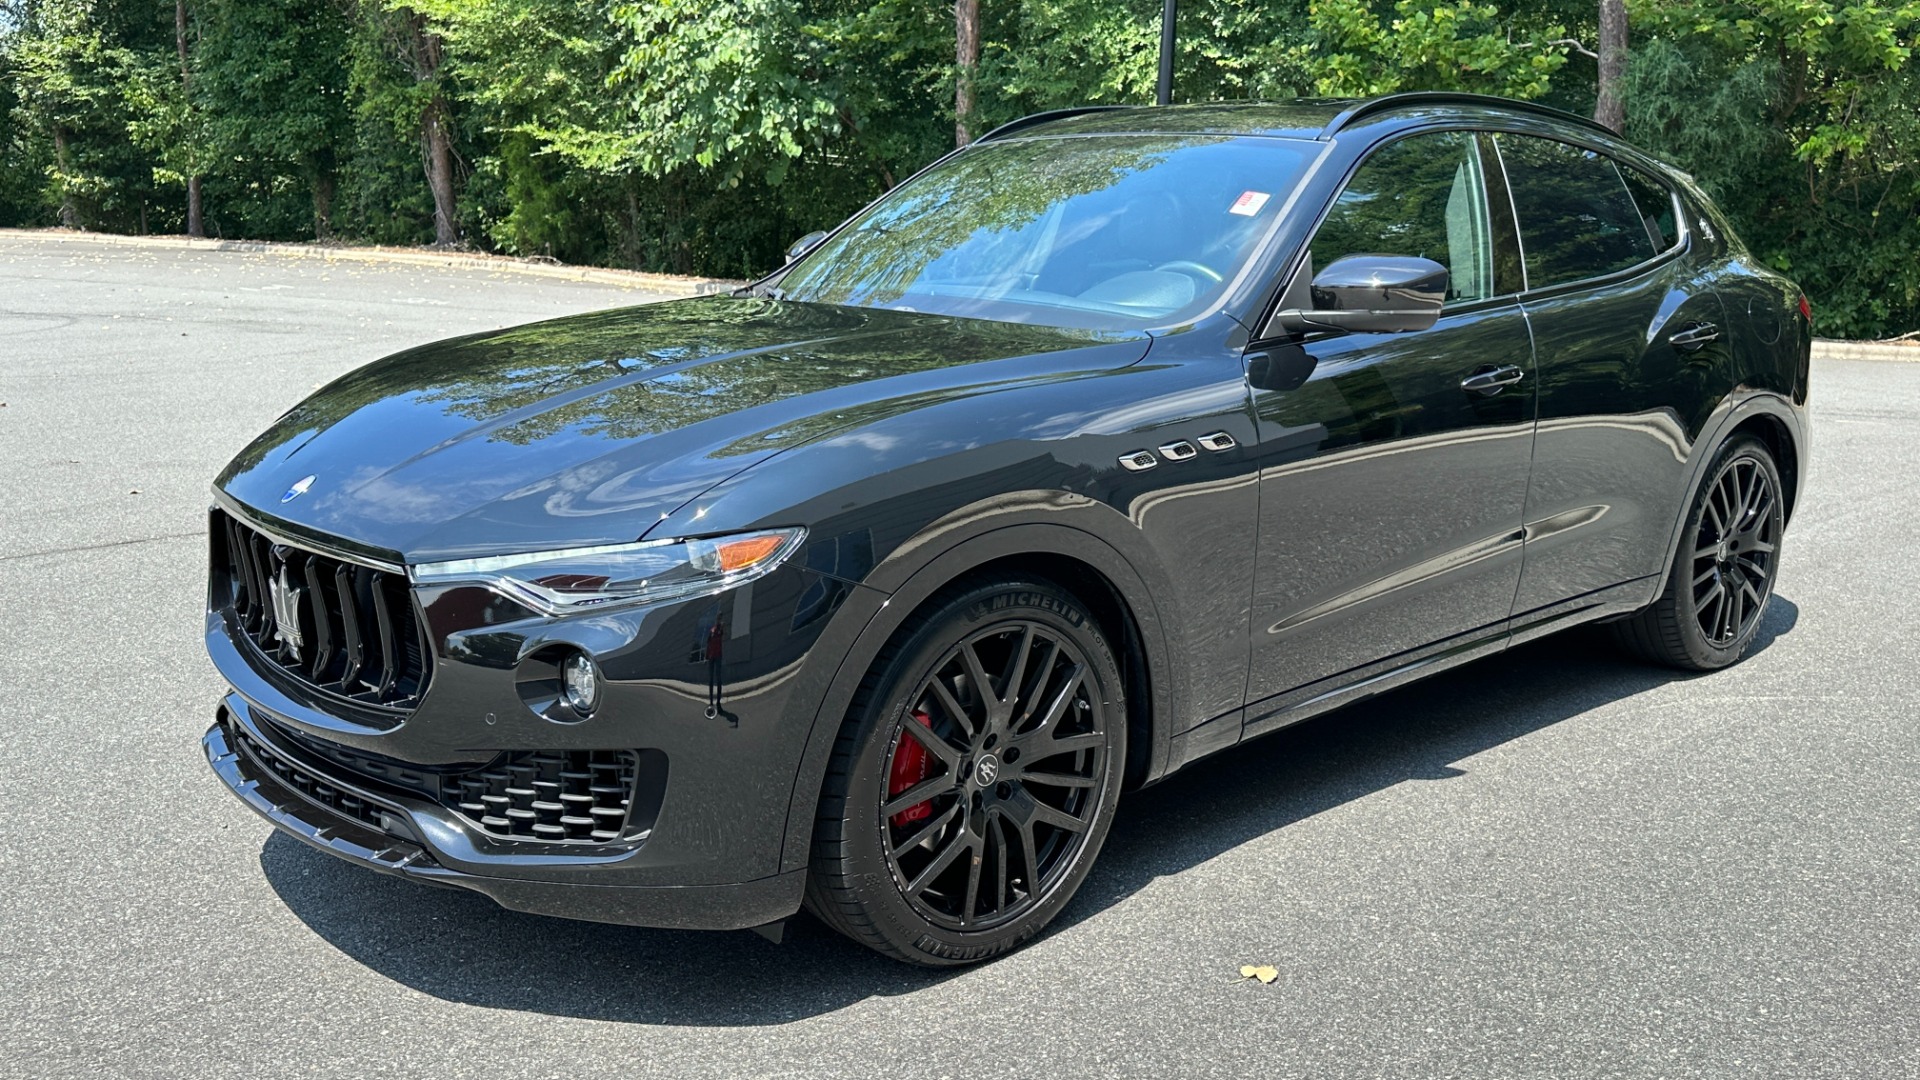 Used 2019 Maserati Levante HK SOUND / GLOSS 21IN WHEELS / PANORAMIC ROOF / DRIVER ASSIST / MORE!! for sale $41,995 at Formula Imports in Charlotte NC 28227 7